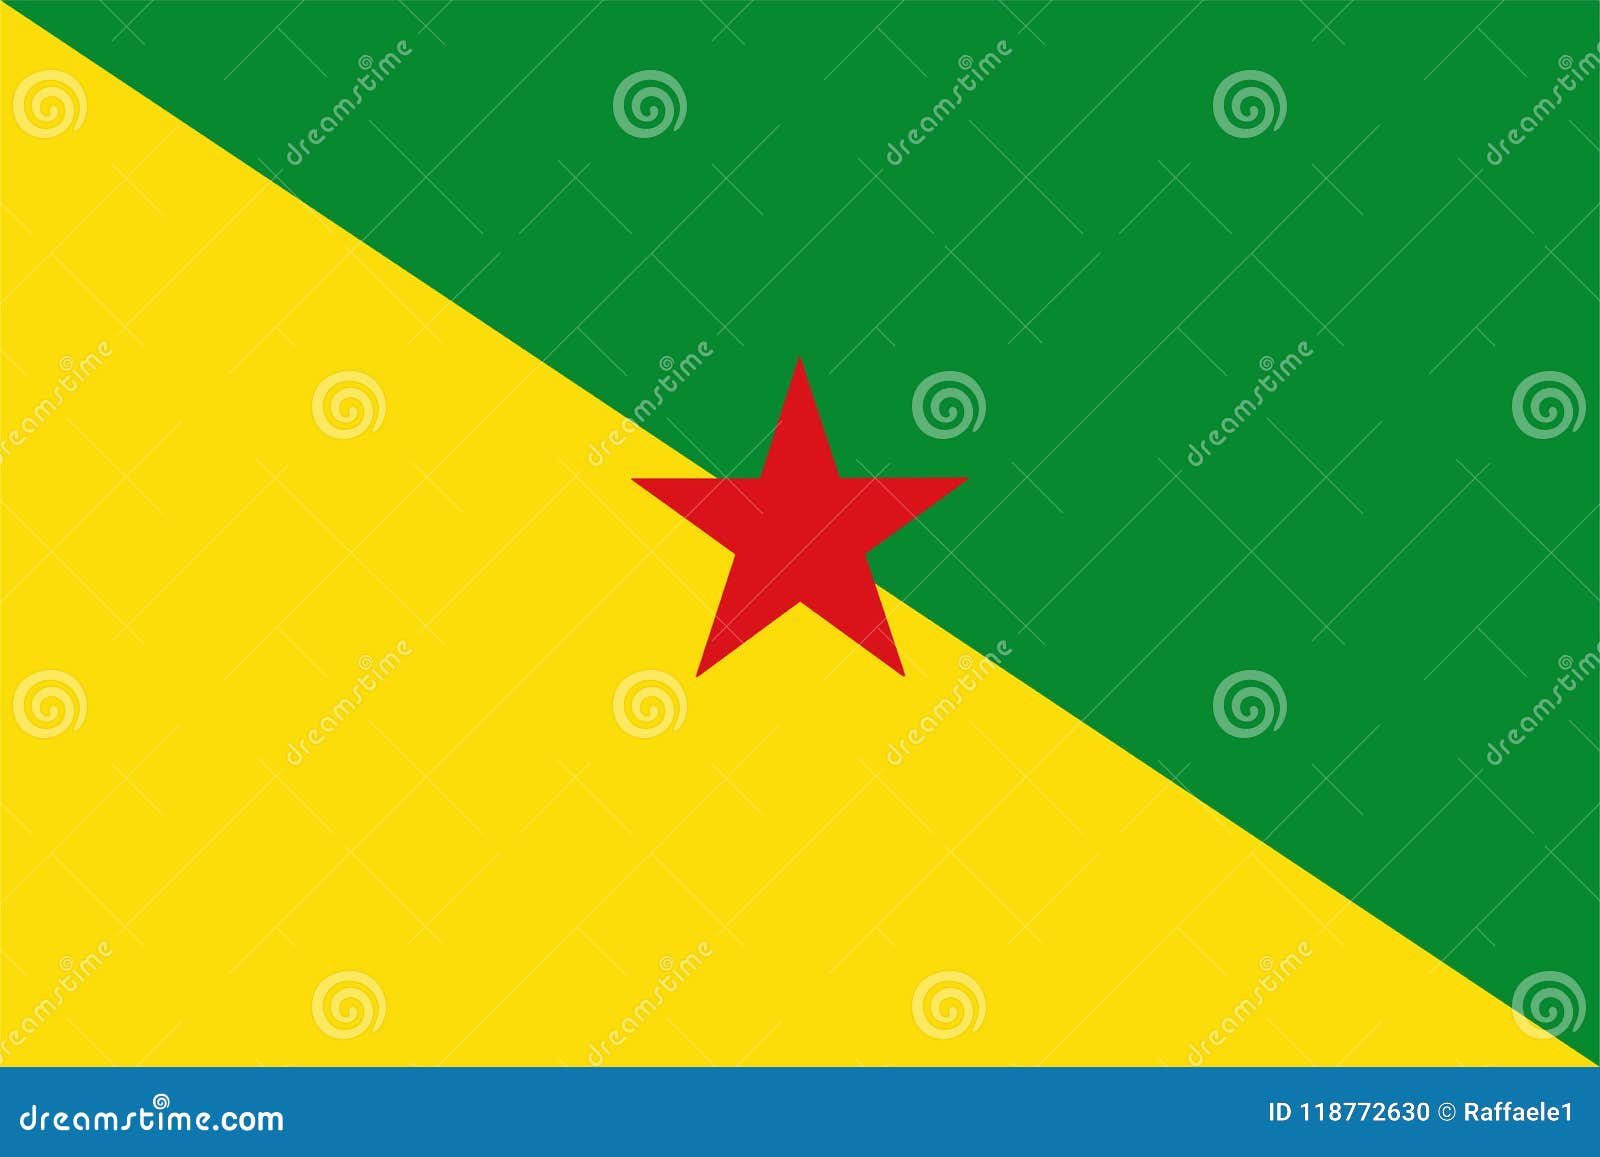 Lab bue Tegnsætning Flag of French Guiana stock vector. Illustration of yellow - 118772630